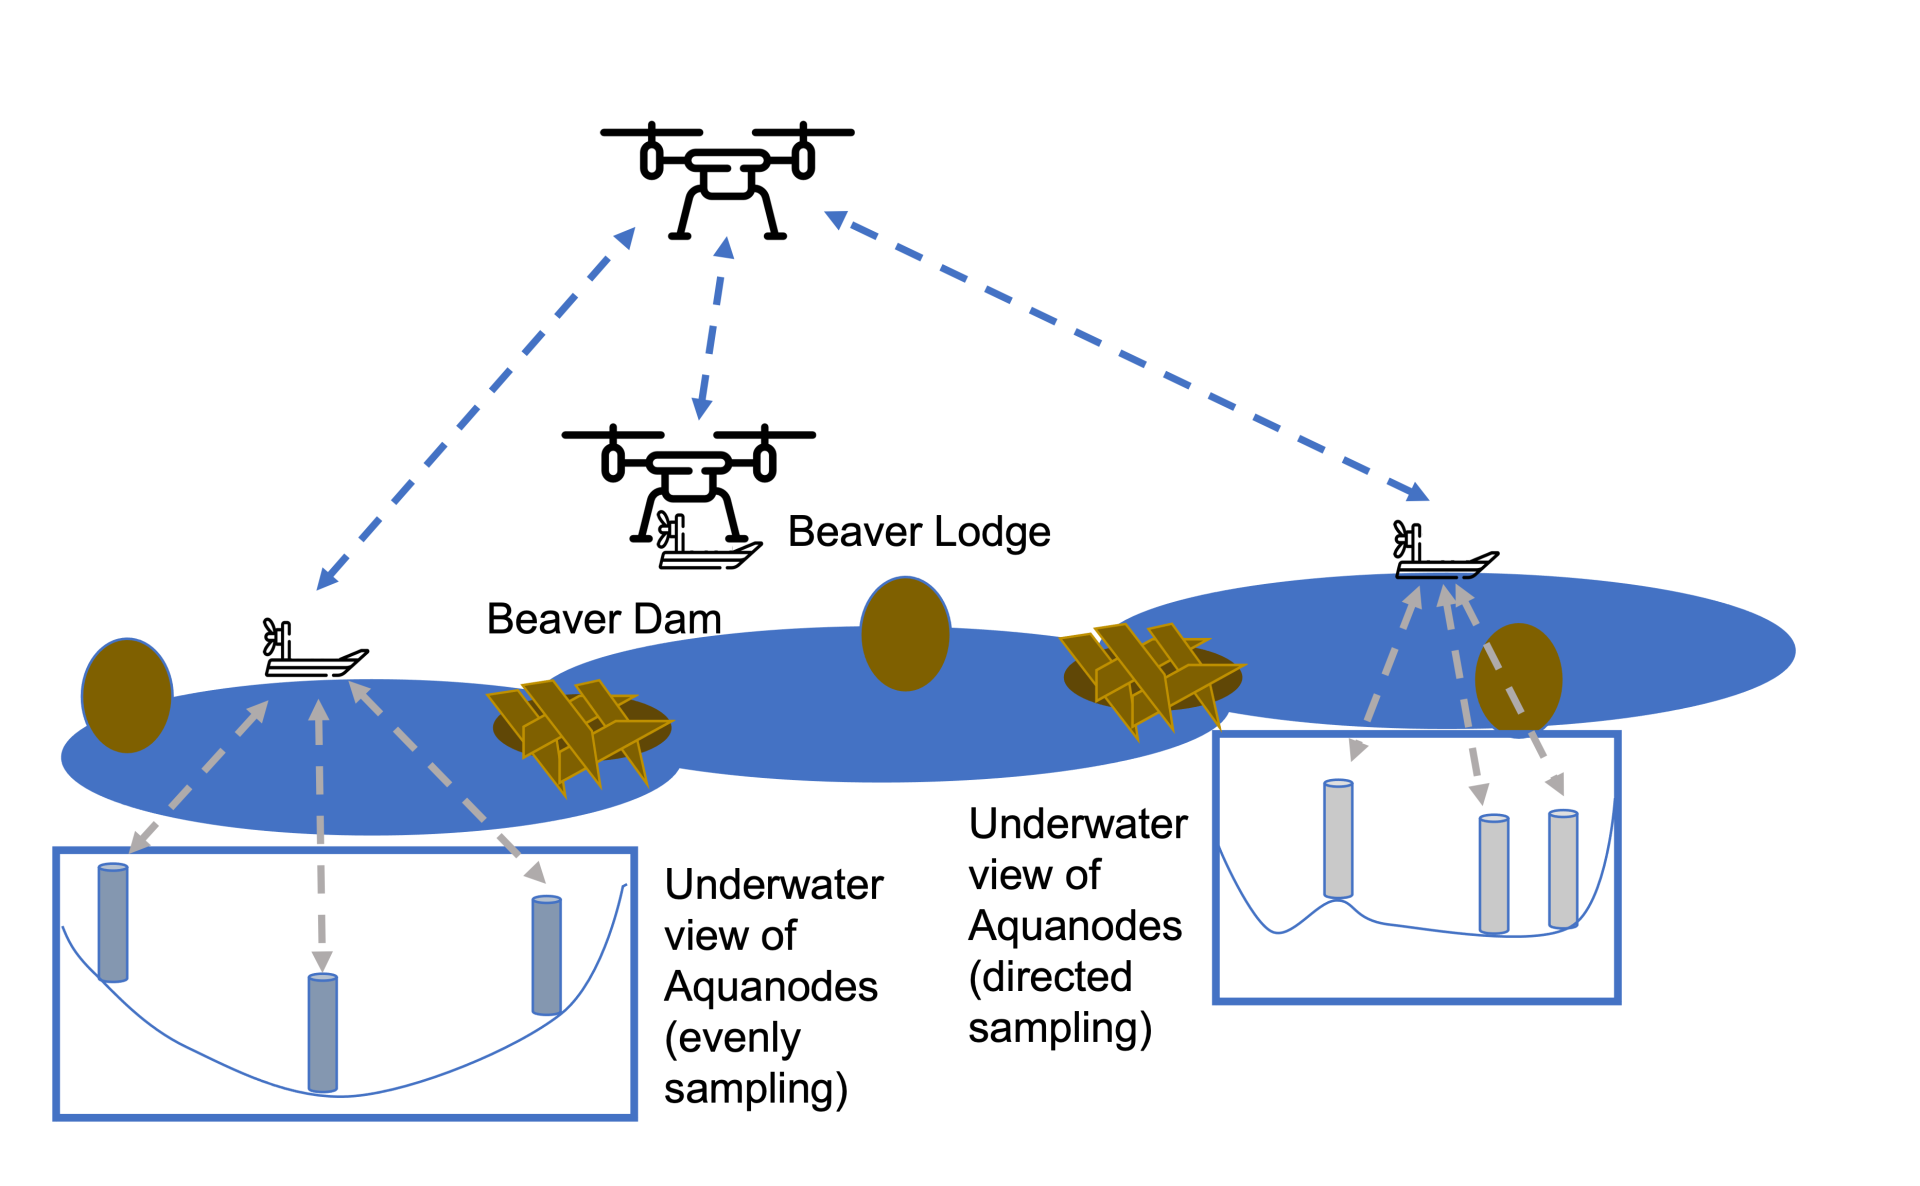 Descriptive image of the ARCTIC Ecosystem project showing beaver lodges, beaver ponds, underwater sensors, surface boats, and drones.